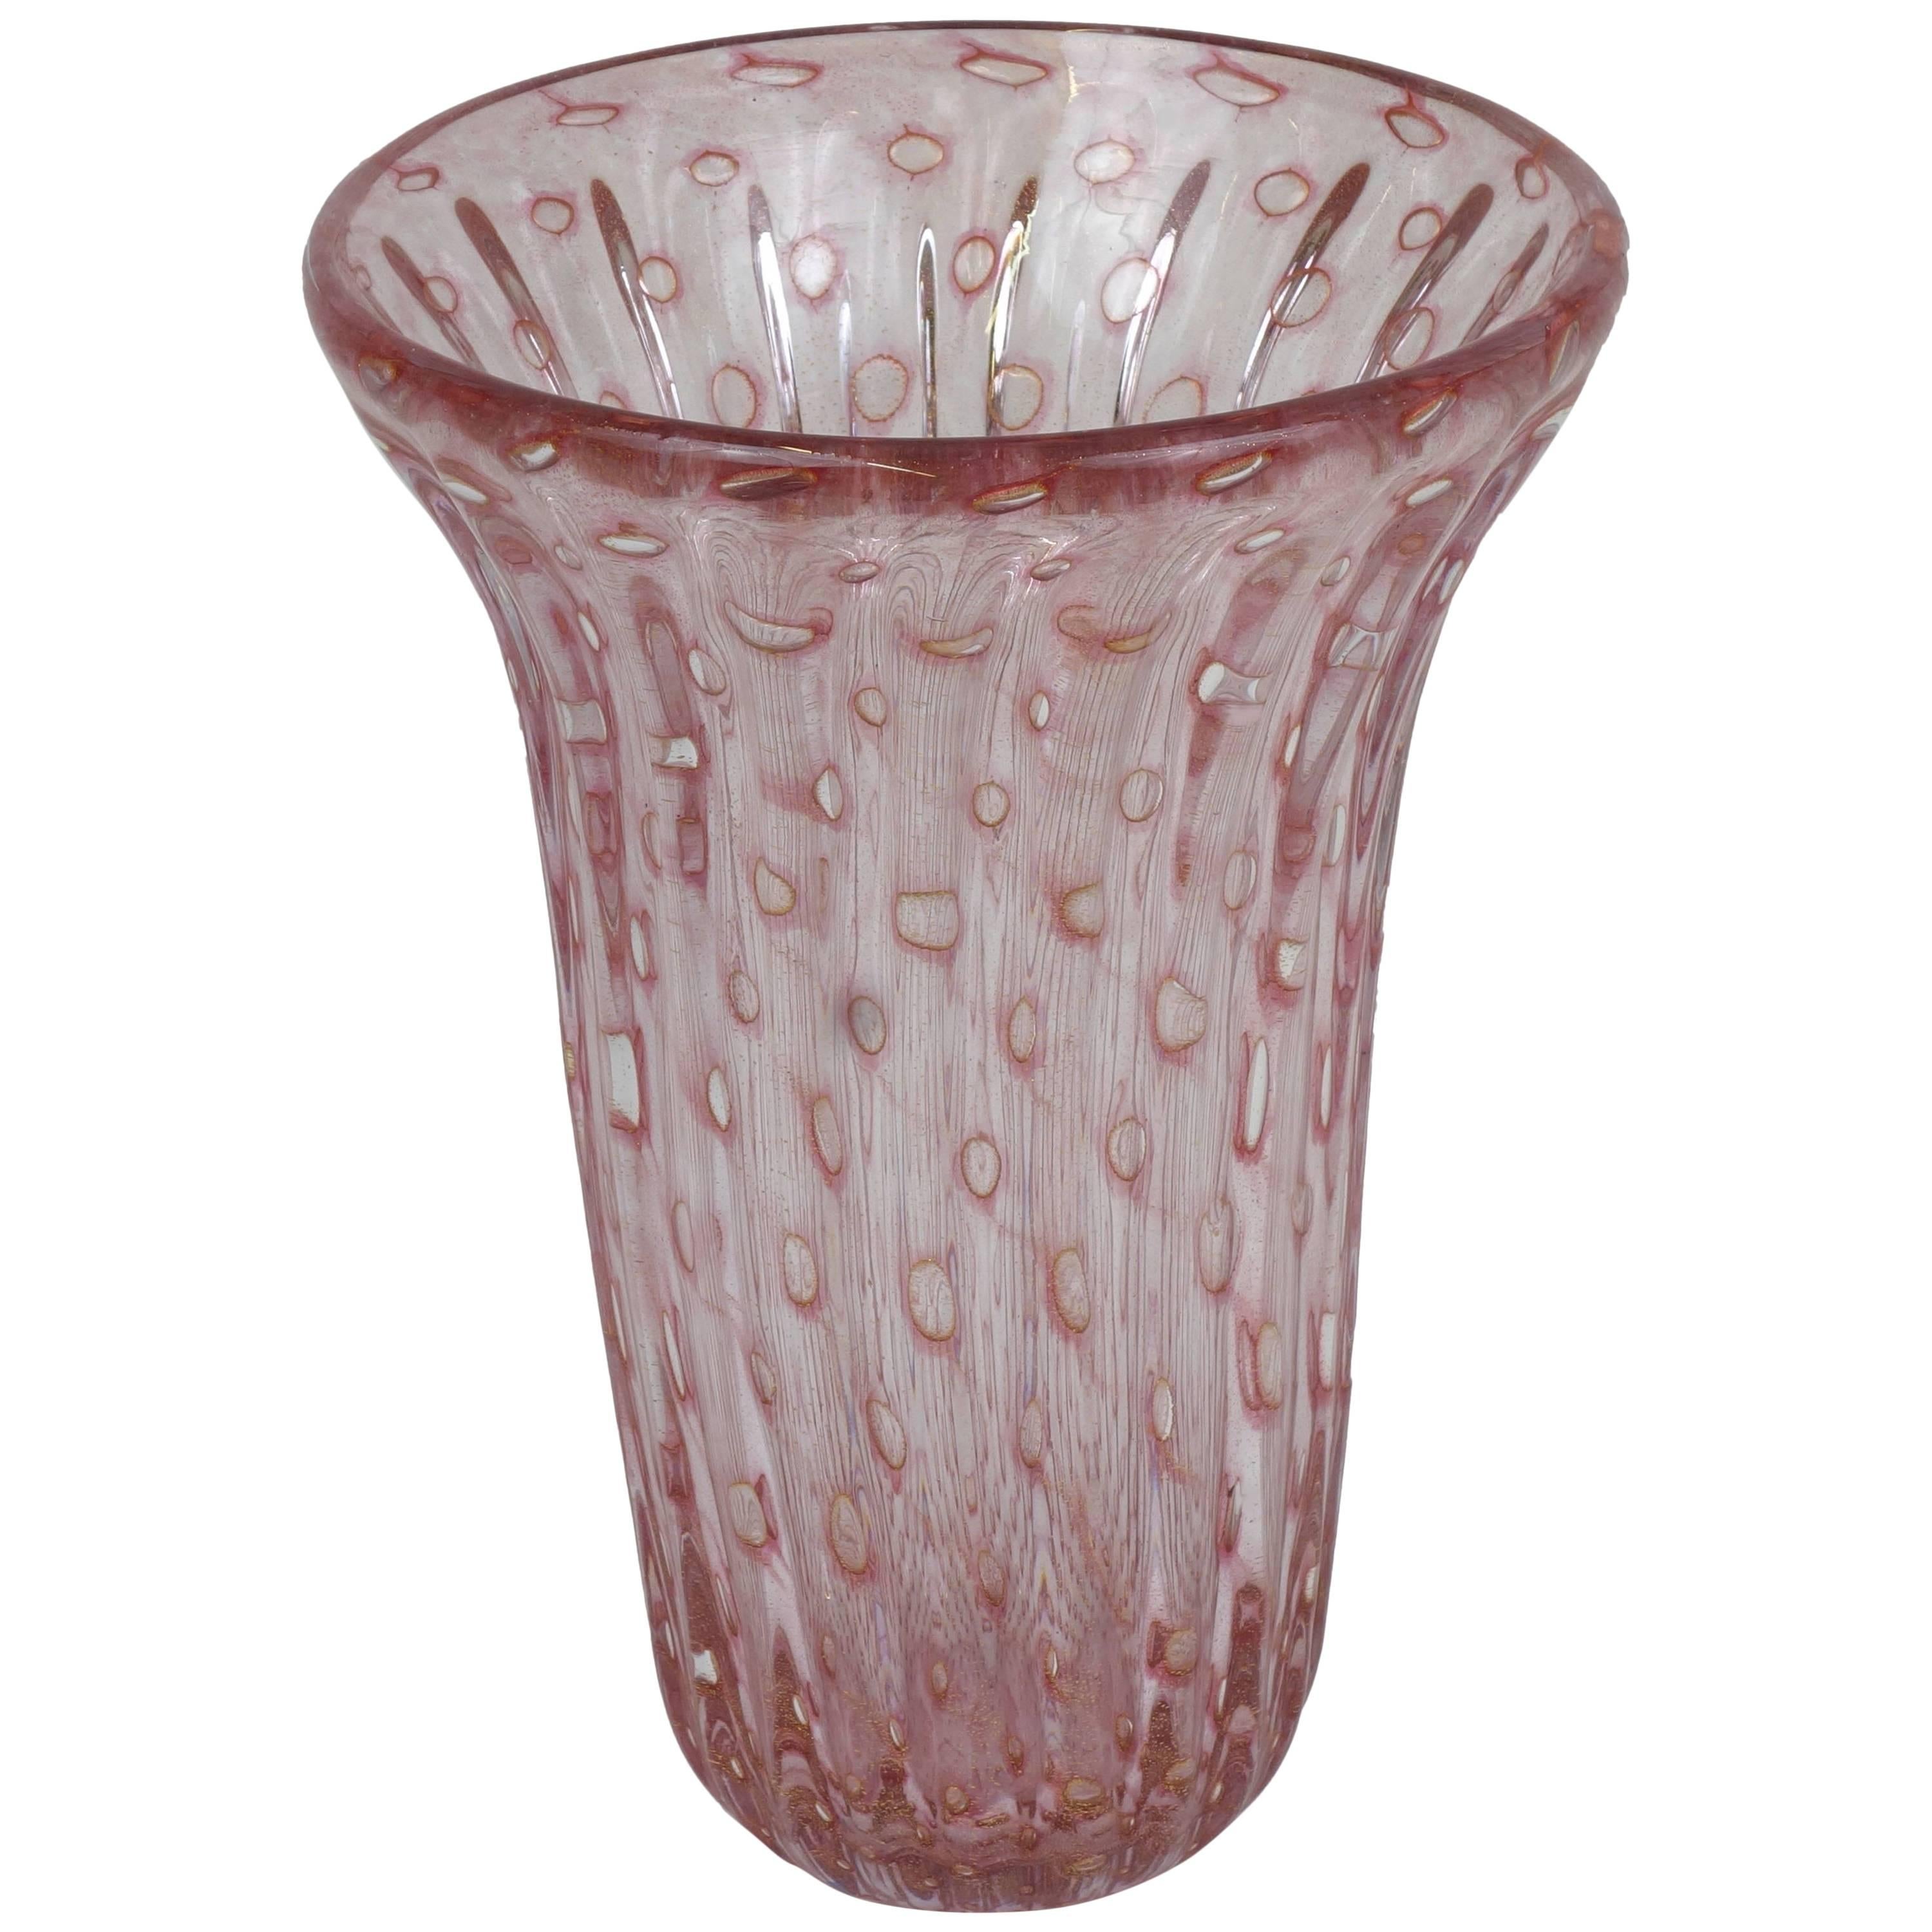 Handblown Fluted Murano Glass Vase by Fratelli Toso, Italy, 1950 For Sale